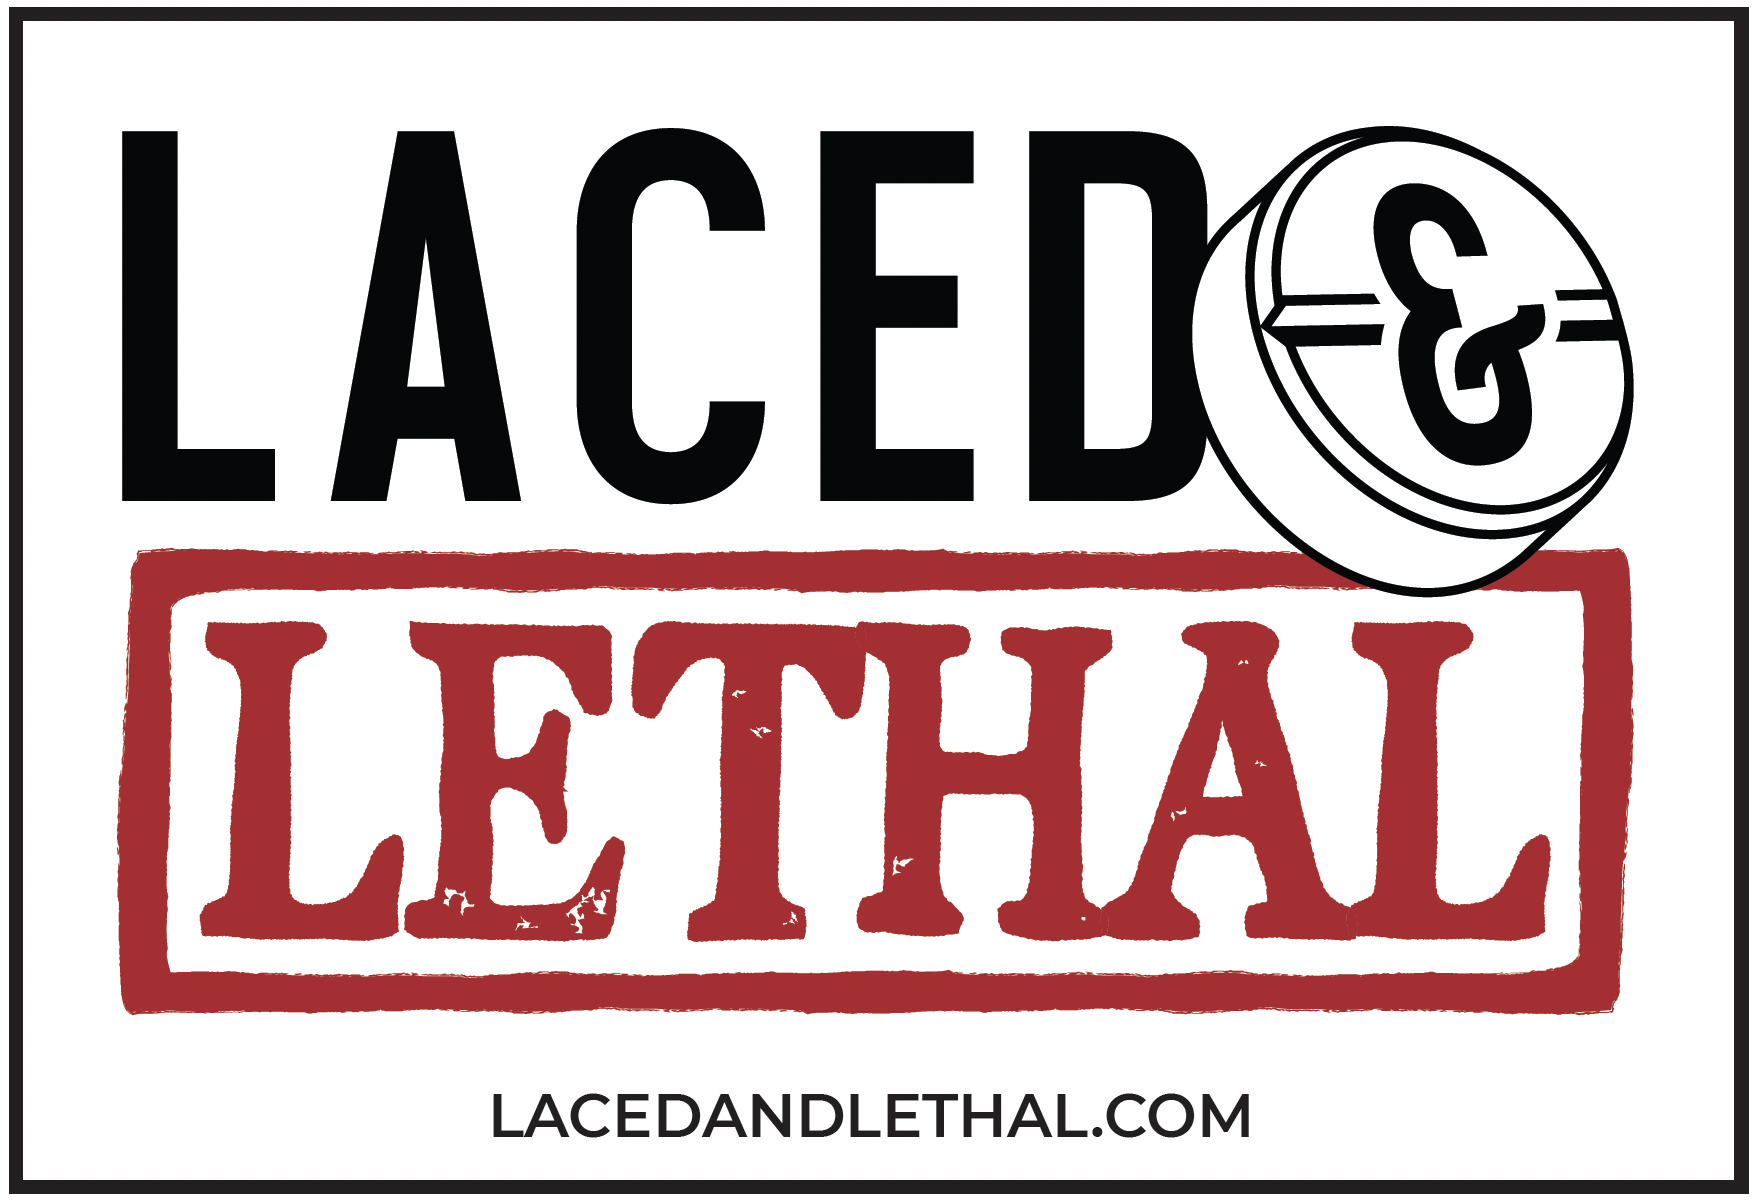 Laced and Lethal website logo